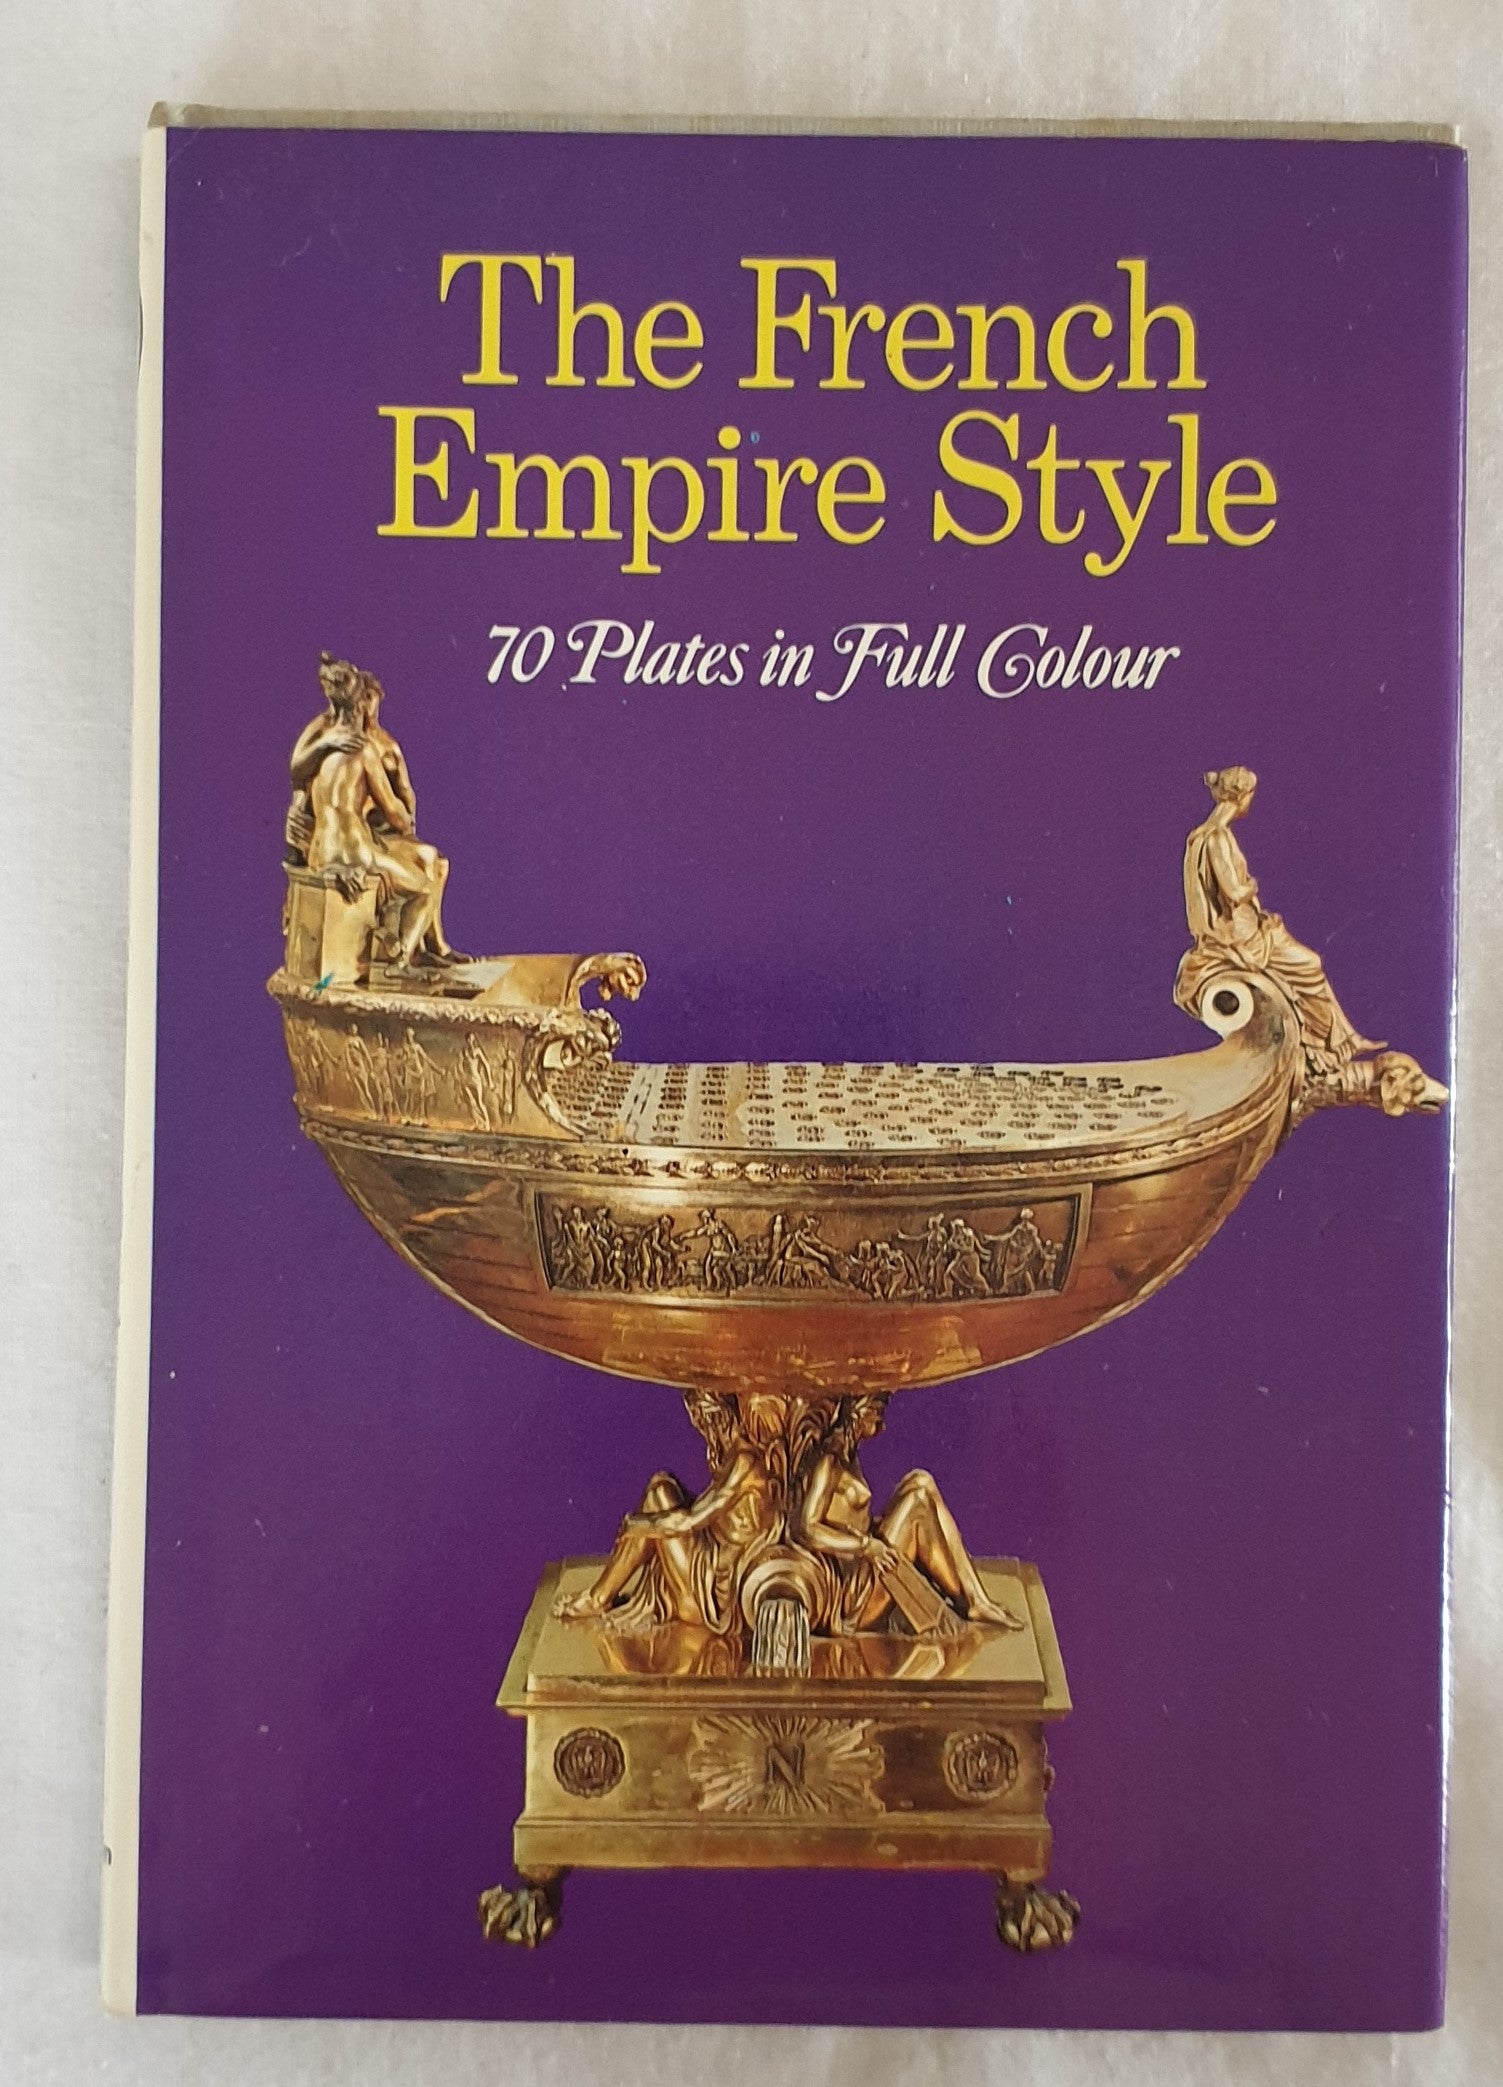 The French Empire Style by Alvar Gonzalez-Palacios